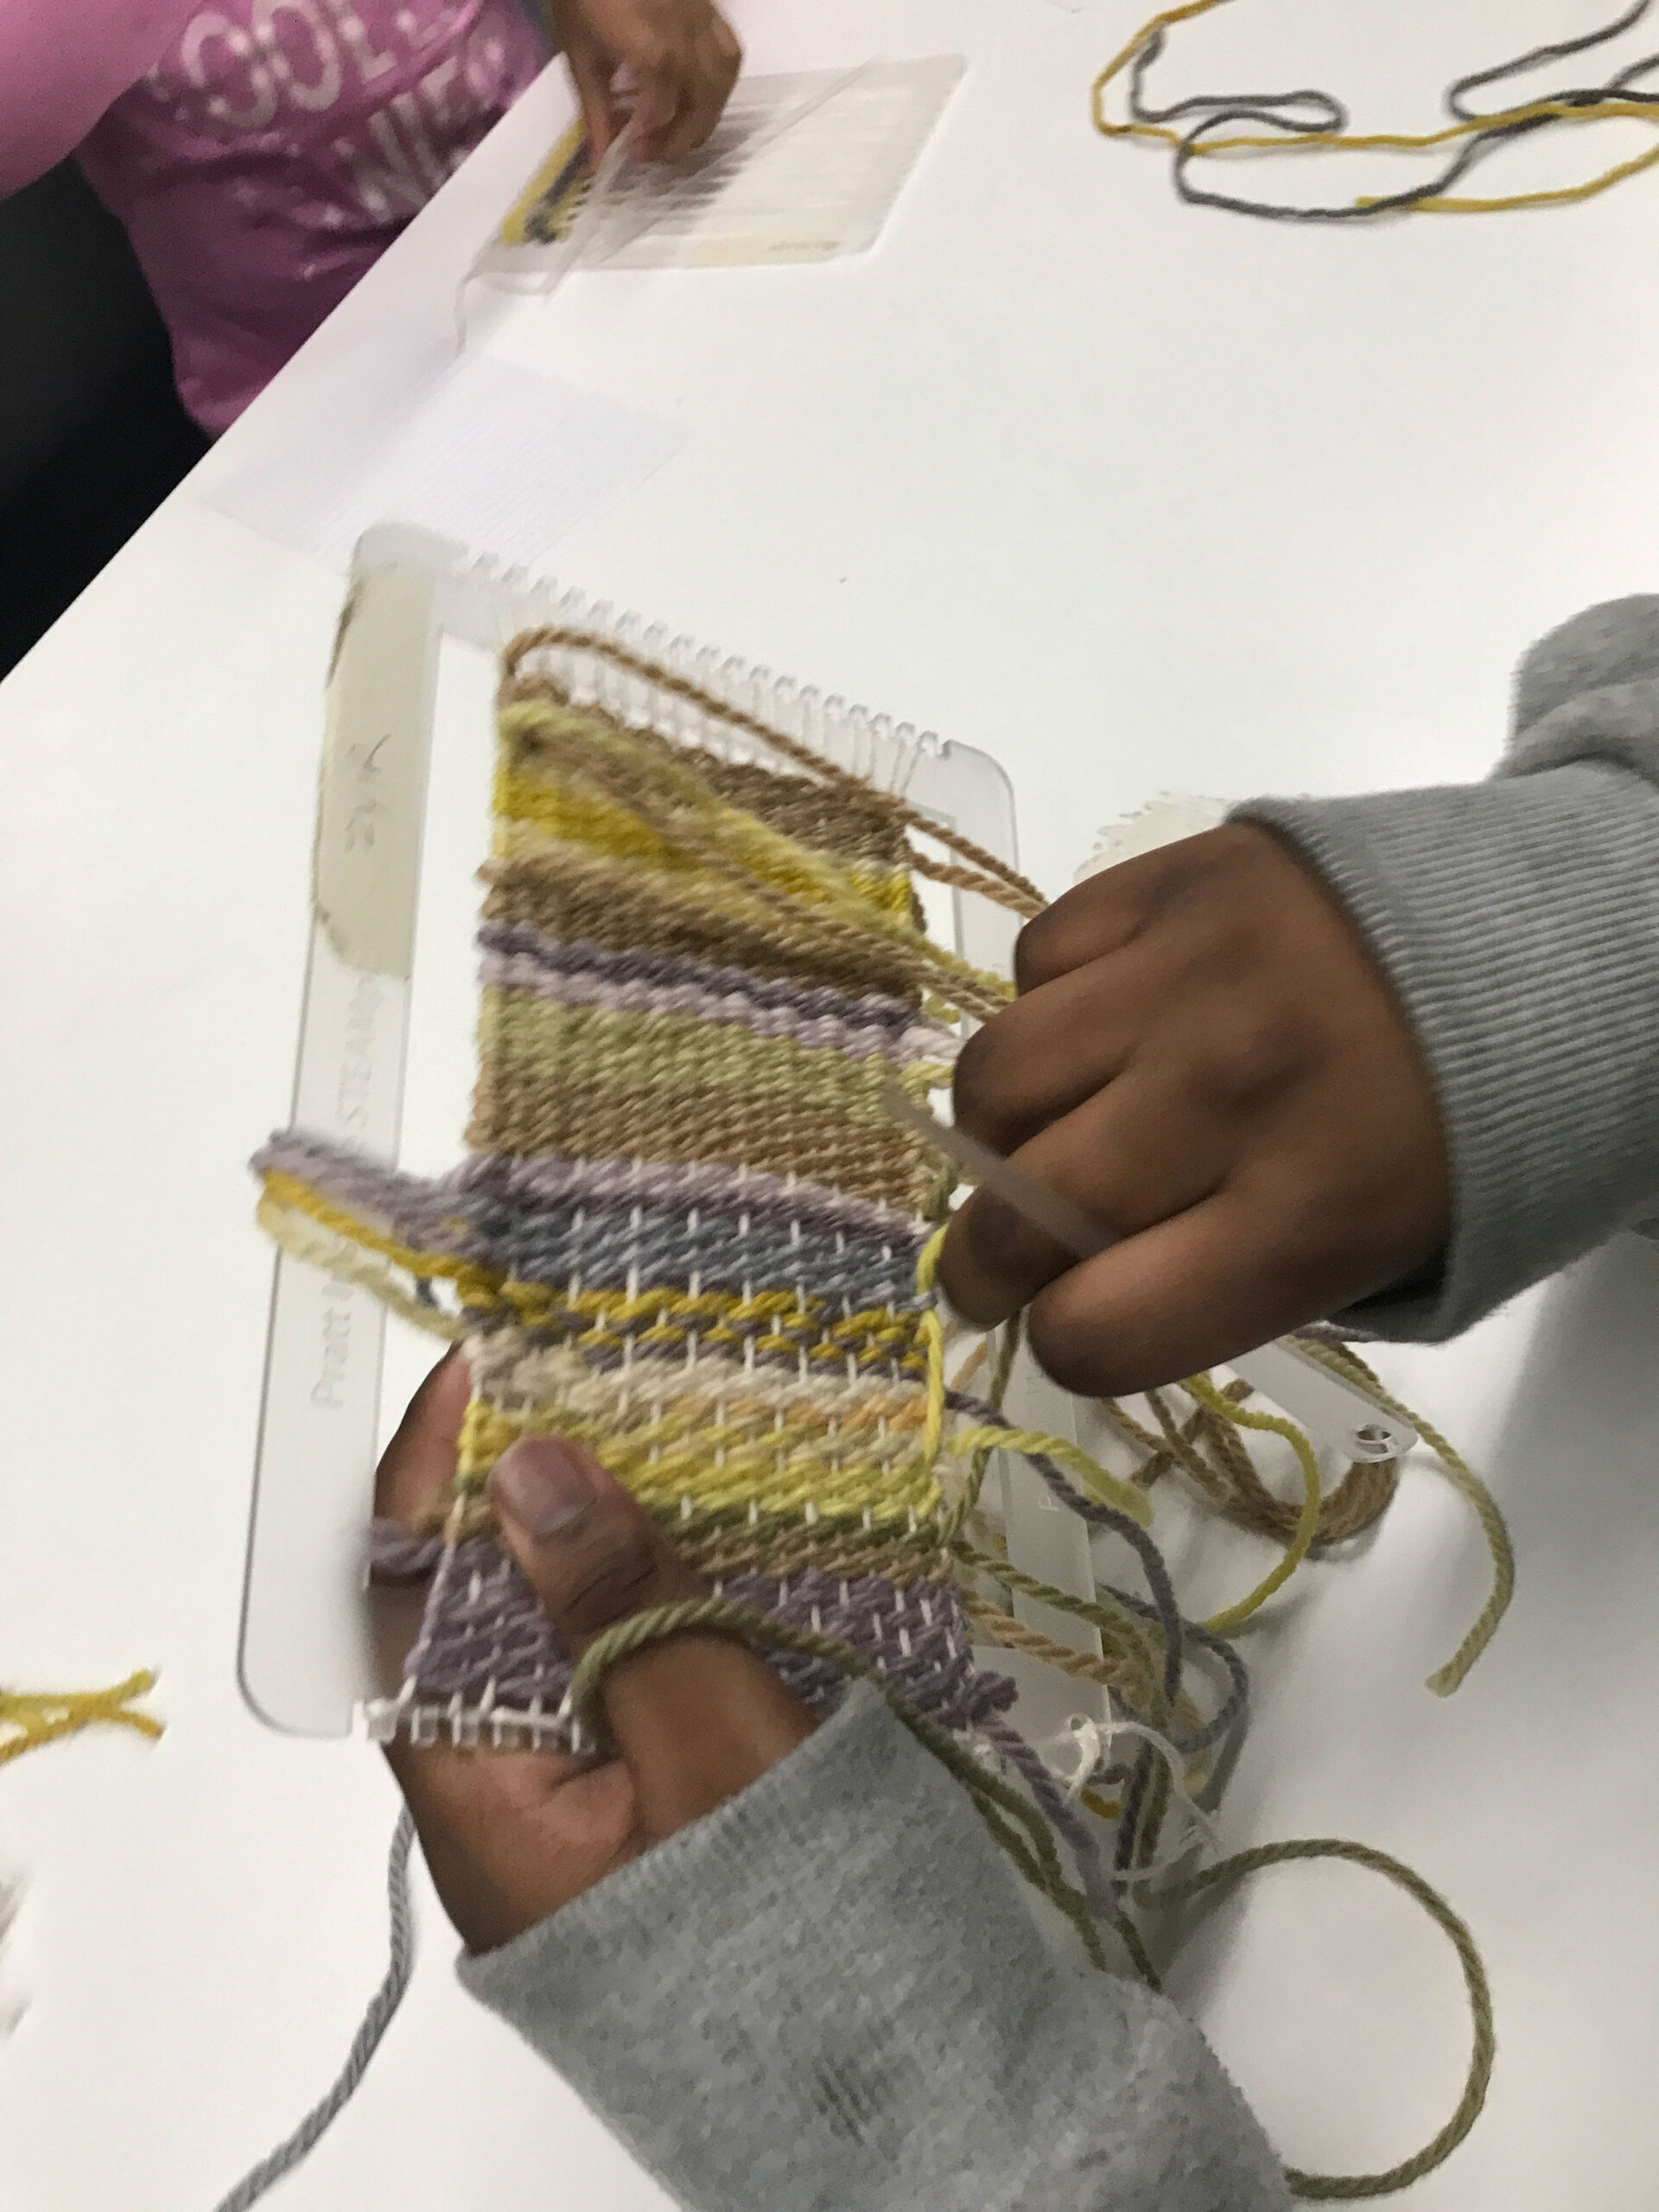 PS270 students weaving with the dyed yarn ​​(courtesy Ana Codorean)